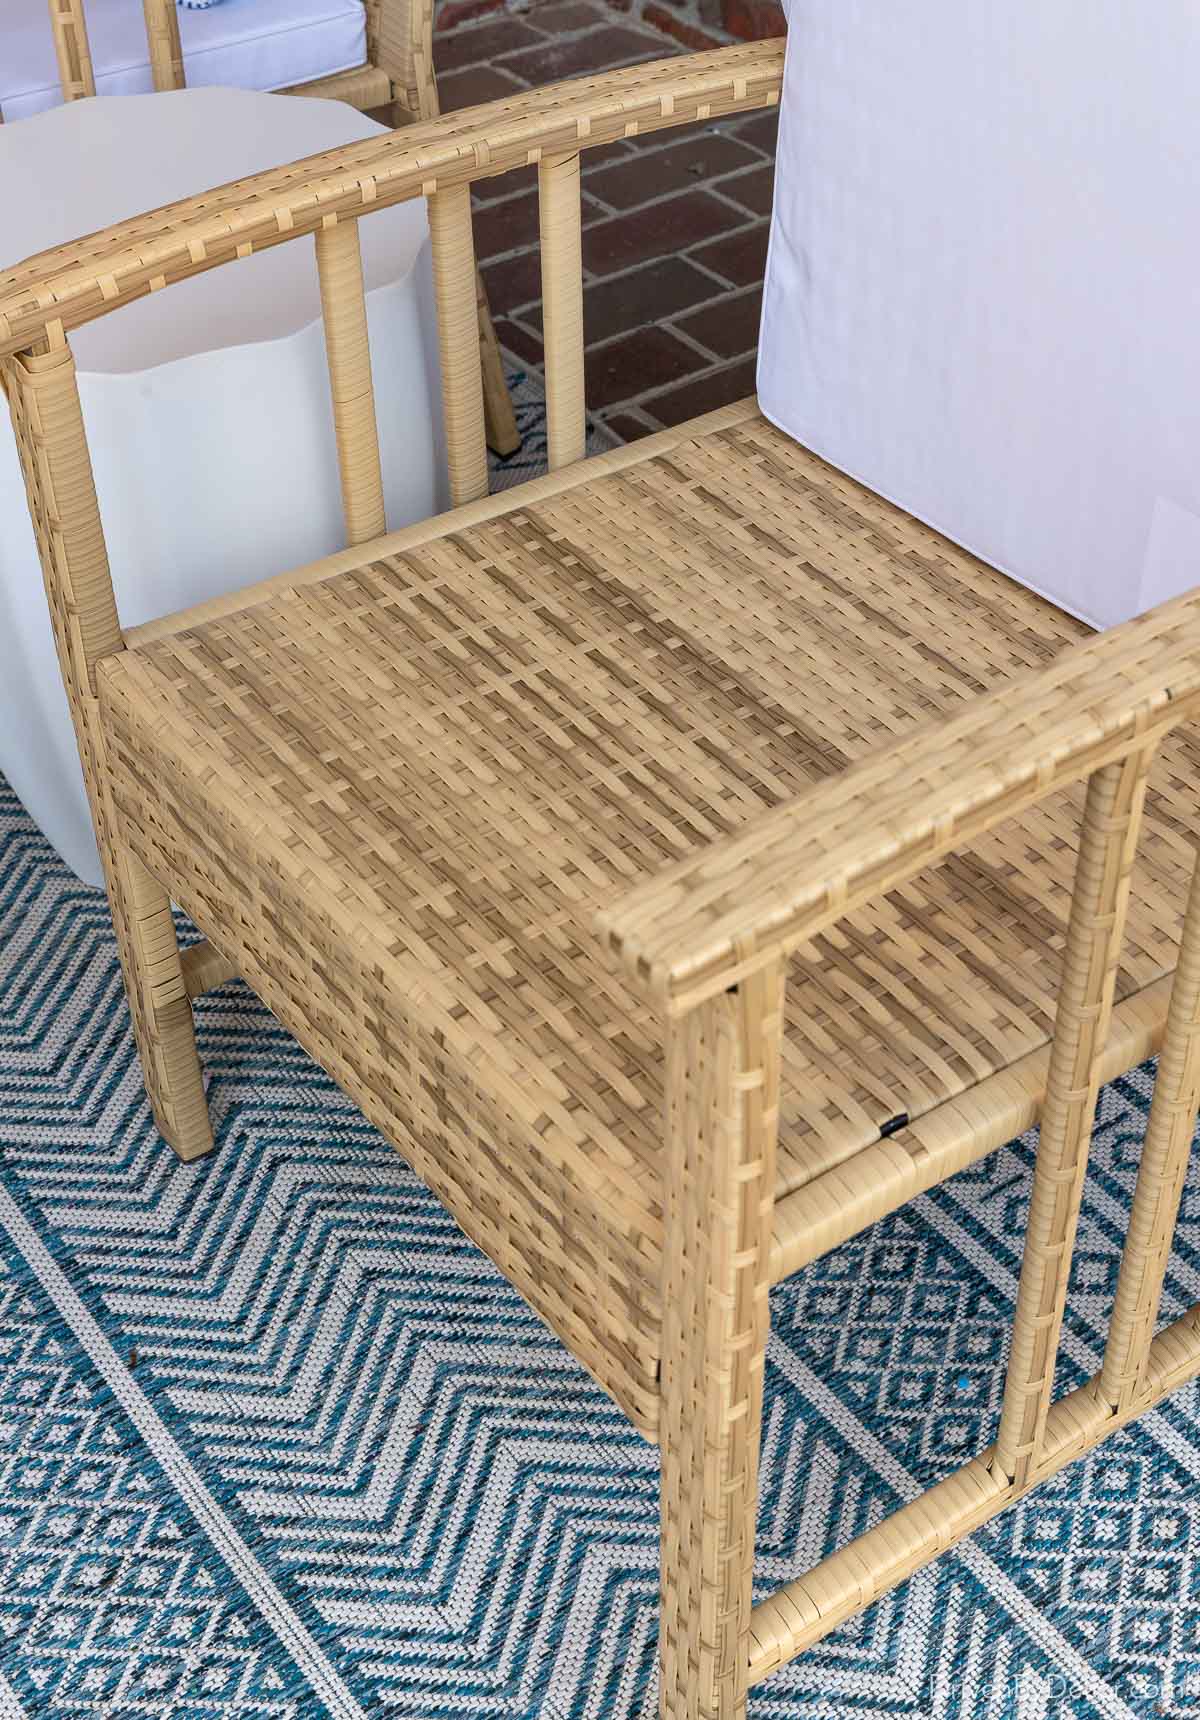 Woven chair seats under cushion of back porch chairs